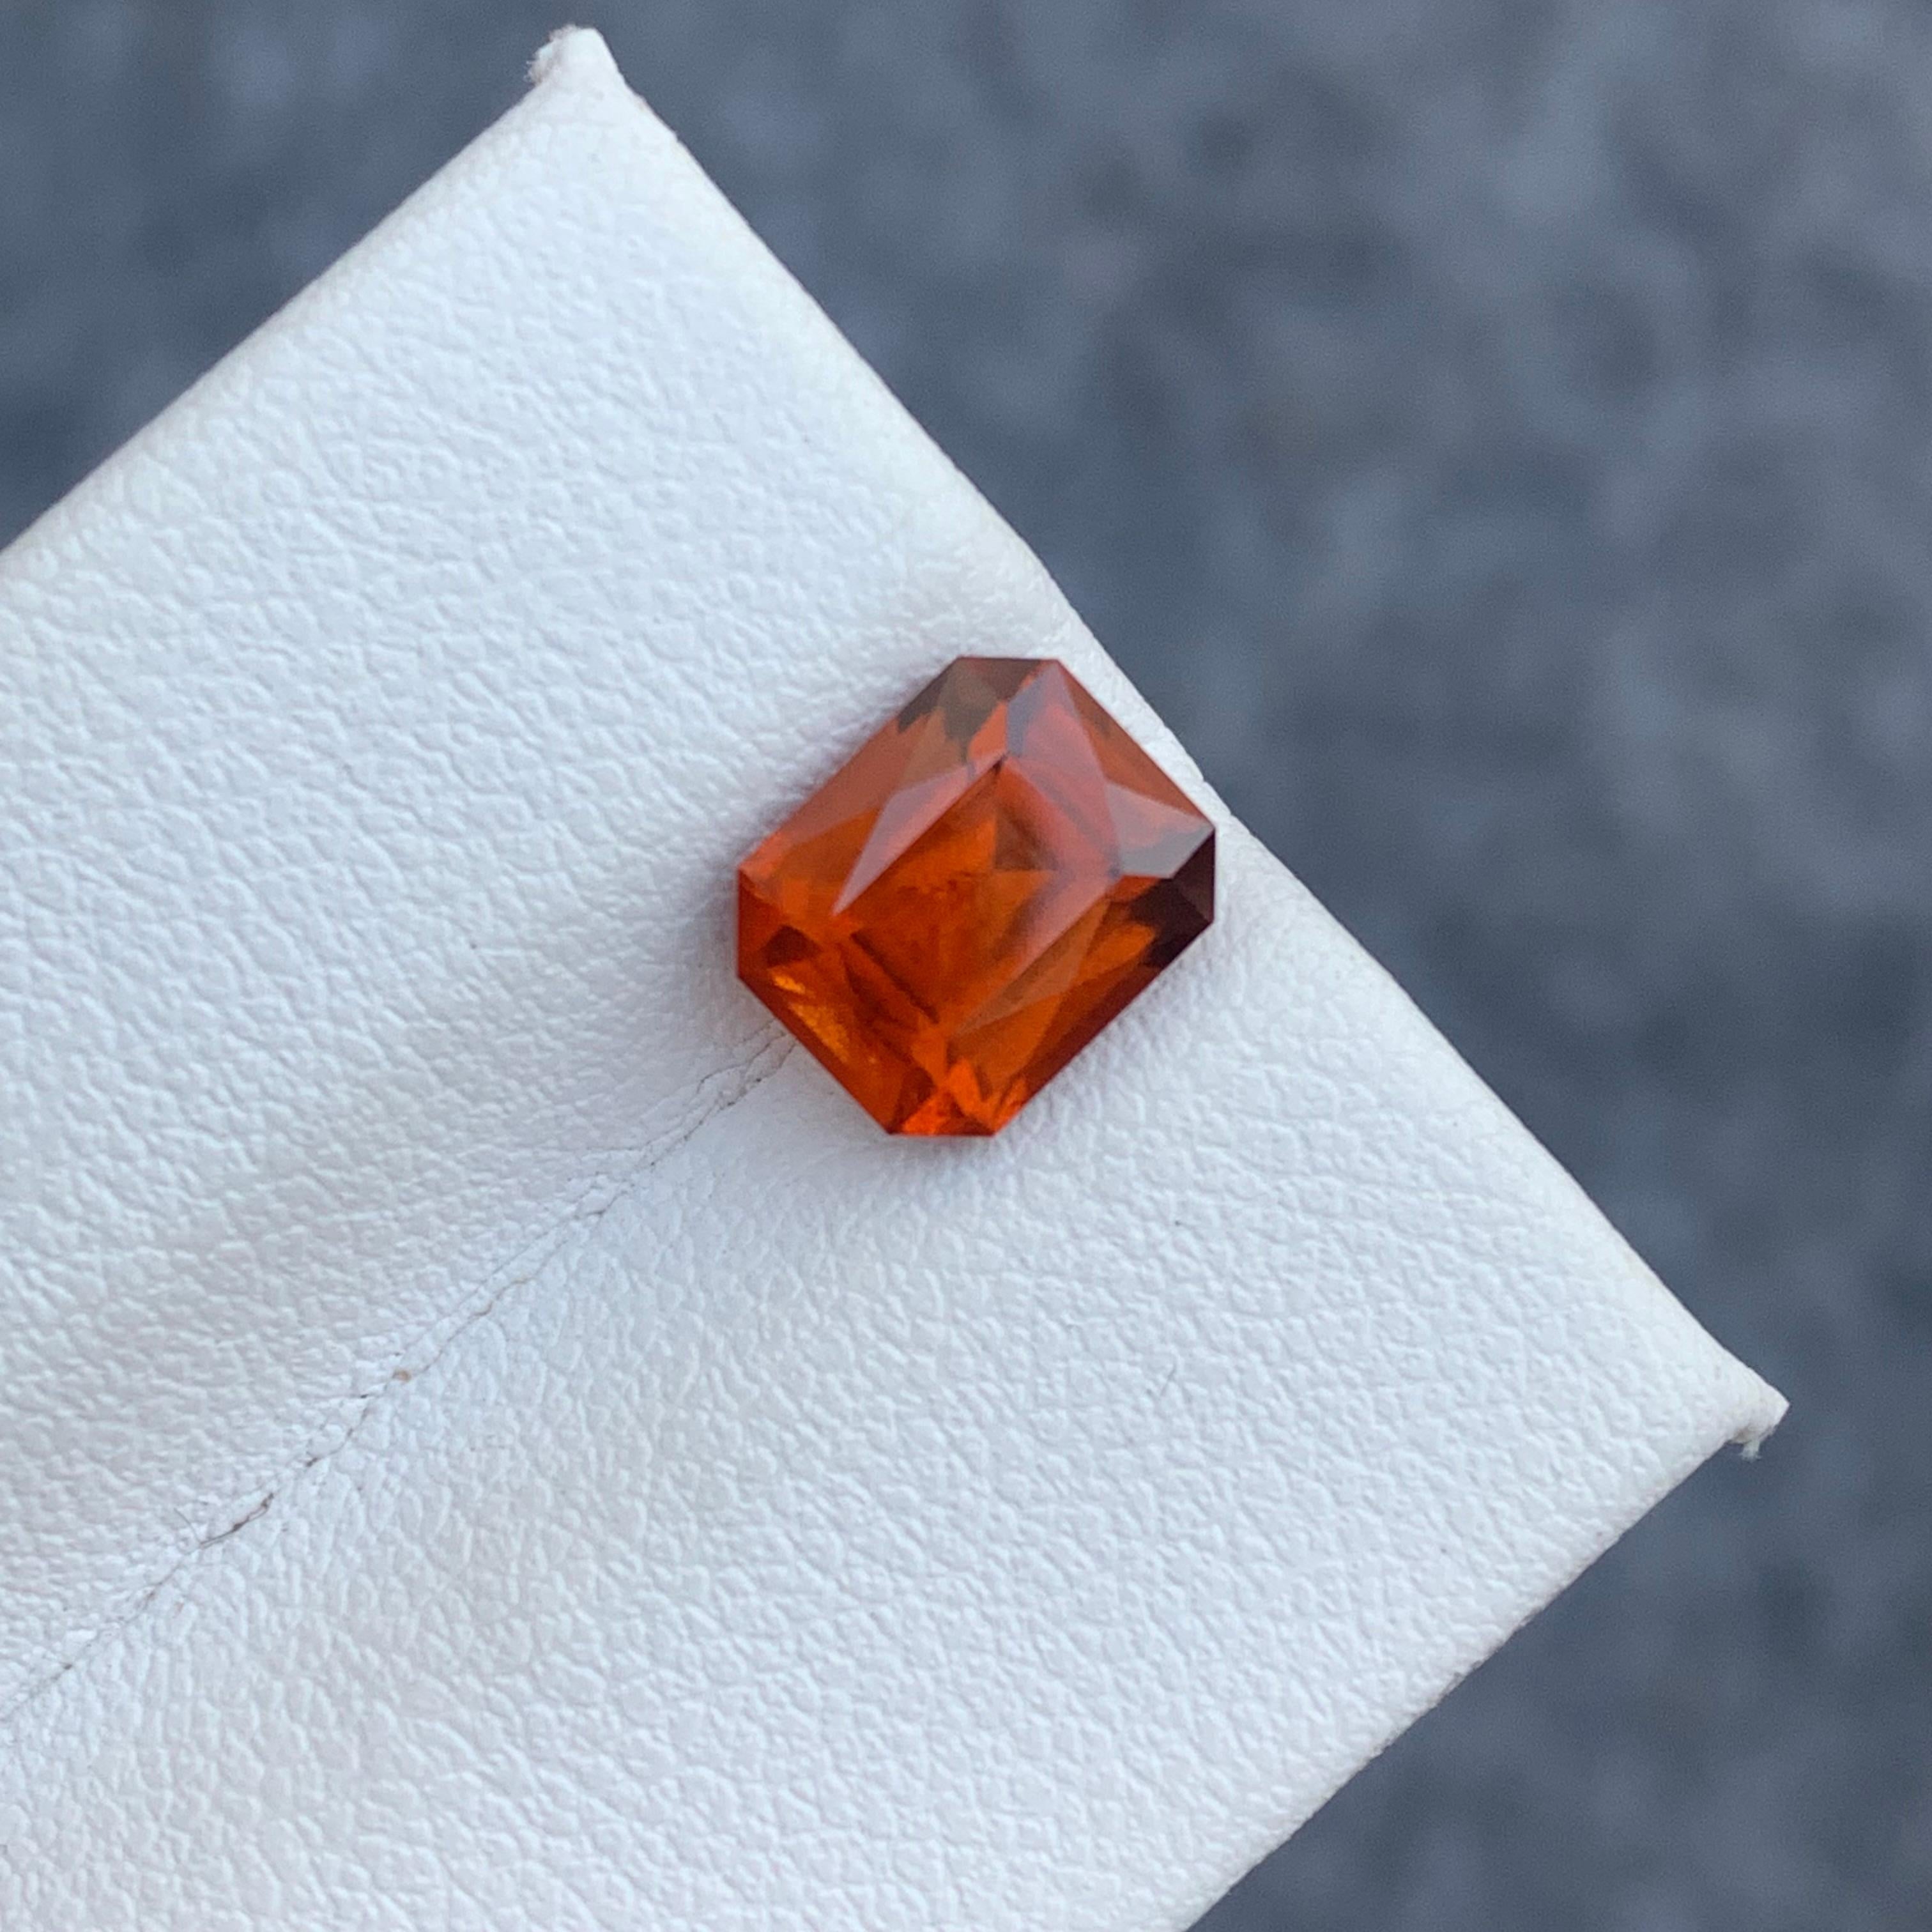 Gemstone Type : Hessonite Garnet
Weight : 2.70 Carats
Dimensions : 8.3x6.8x5.1 Mm
Origin : Africa
Clarity : Eye Clean
Shape: Shape
Color: Brownish Orange
Certificate: On Demand
Birthstone: January Month
According to Vedic astrologists, wearing a